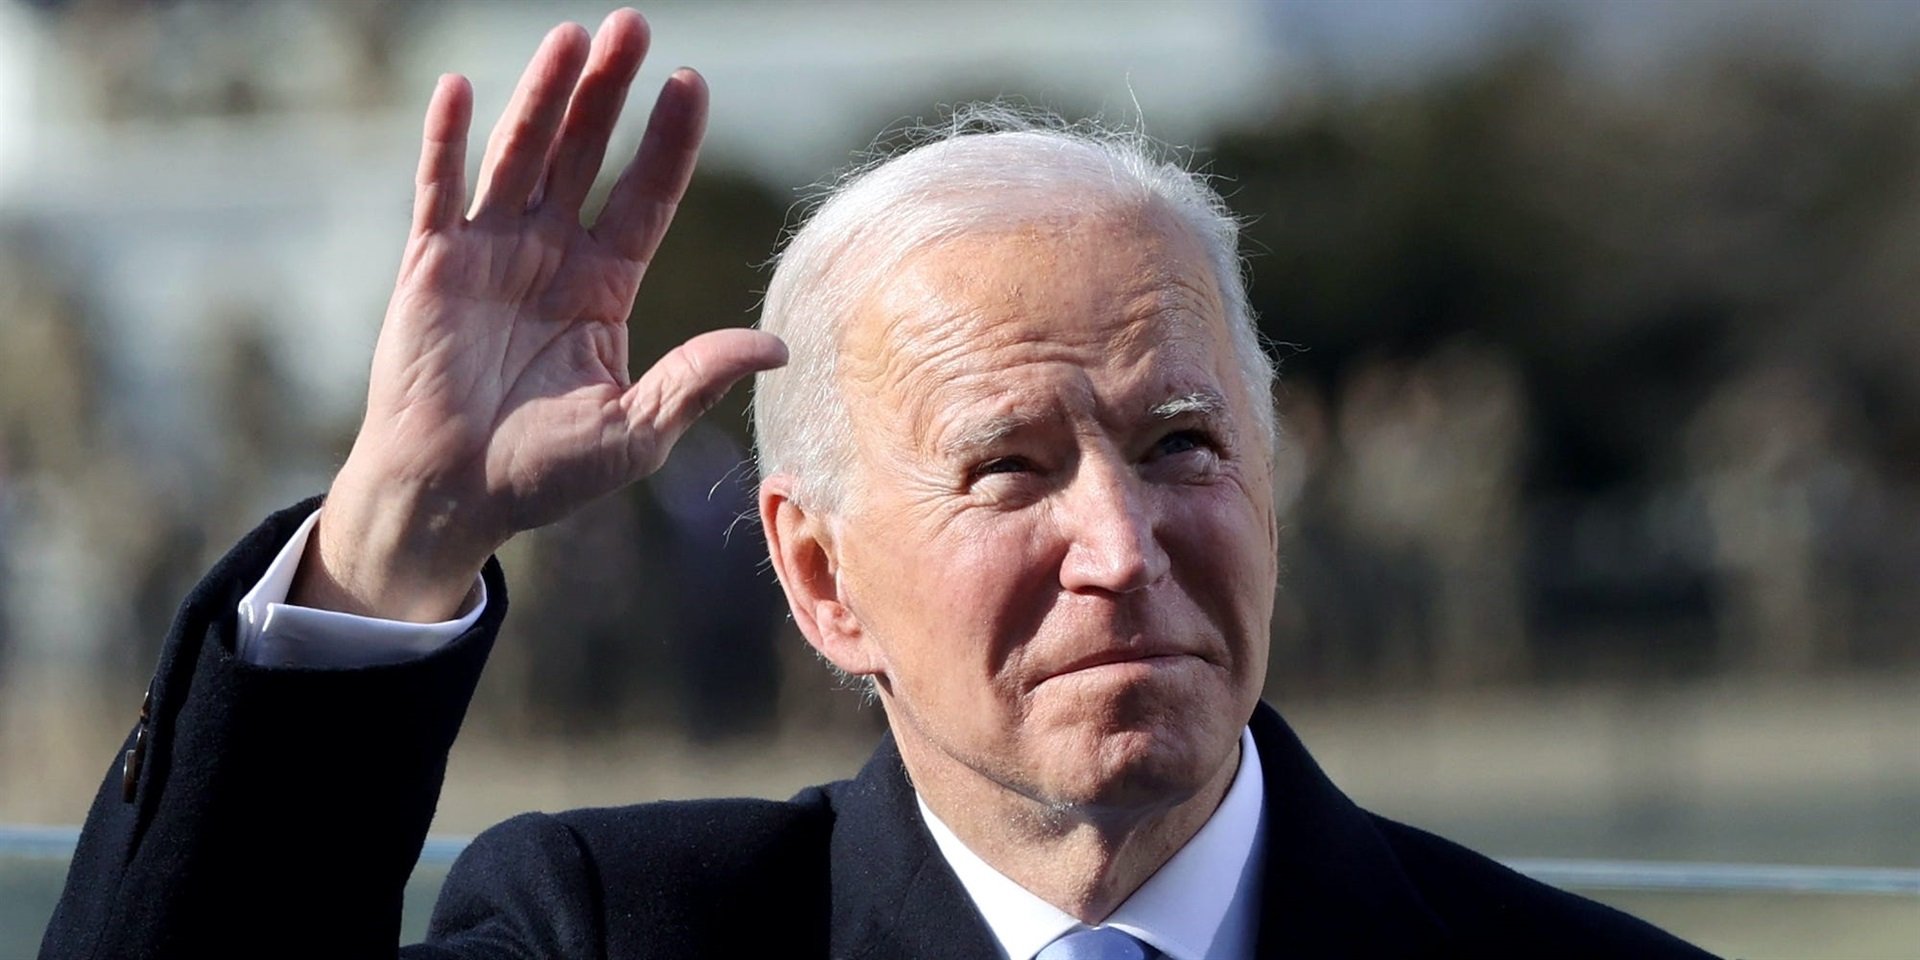 help-is-here-bidens-1-9-trillion-covid-19-aid-bill-wins-final-approval-in-house-news24